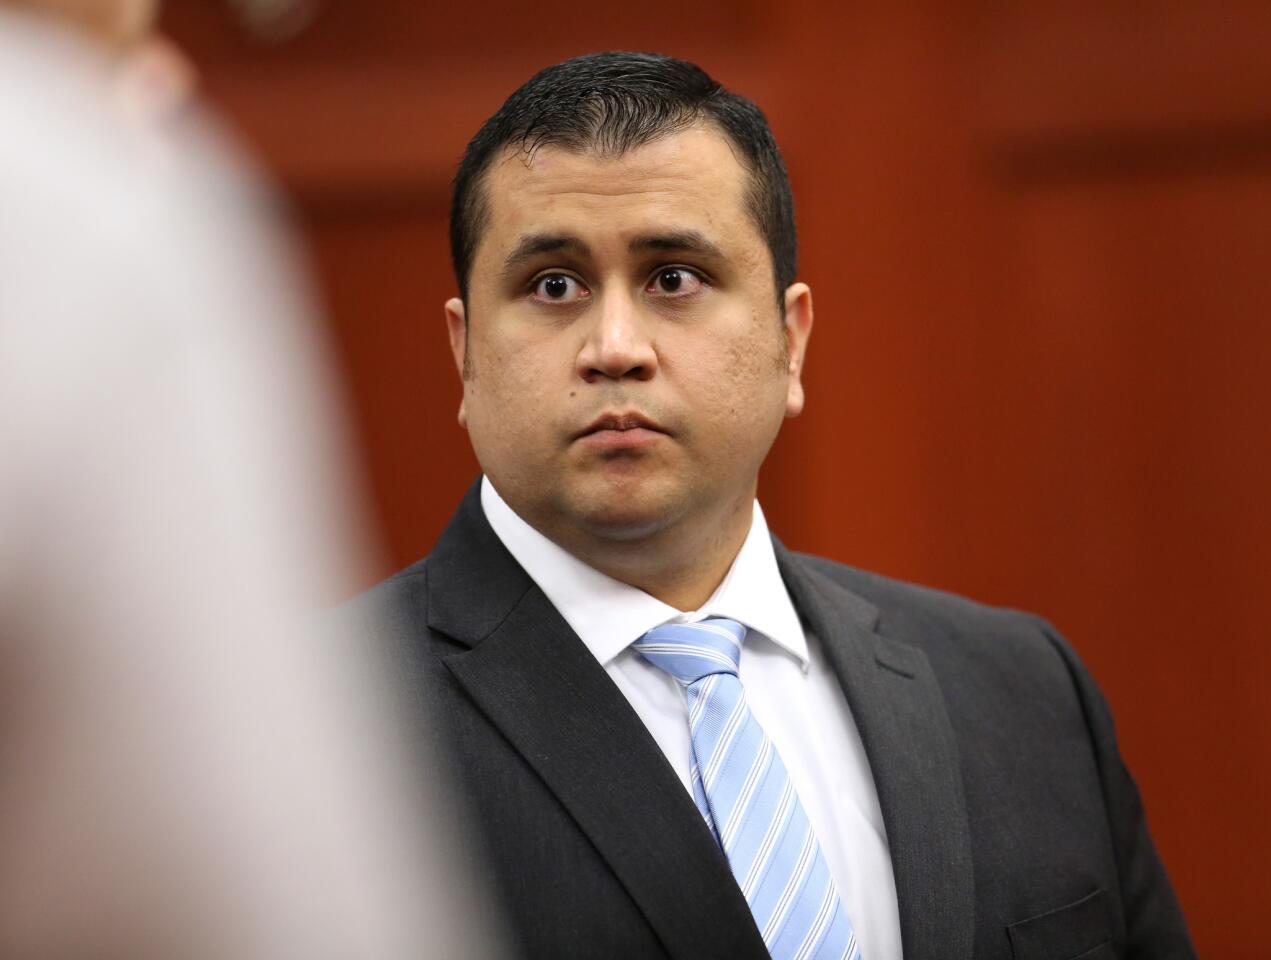 George Zimmerman leaves court at the end of his 16th day of his trial in Seminole circuit court, in Sanford, Fla., Monday, July 1, 2013. Zimmerman is accused in the fatal shooting of Trayvon Martin. (Joe Burbank/Orlando Sentinel/POOL) newsgate CCI B583027756Z.1